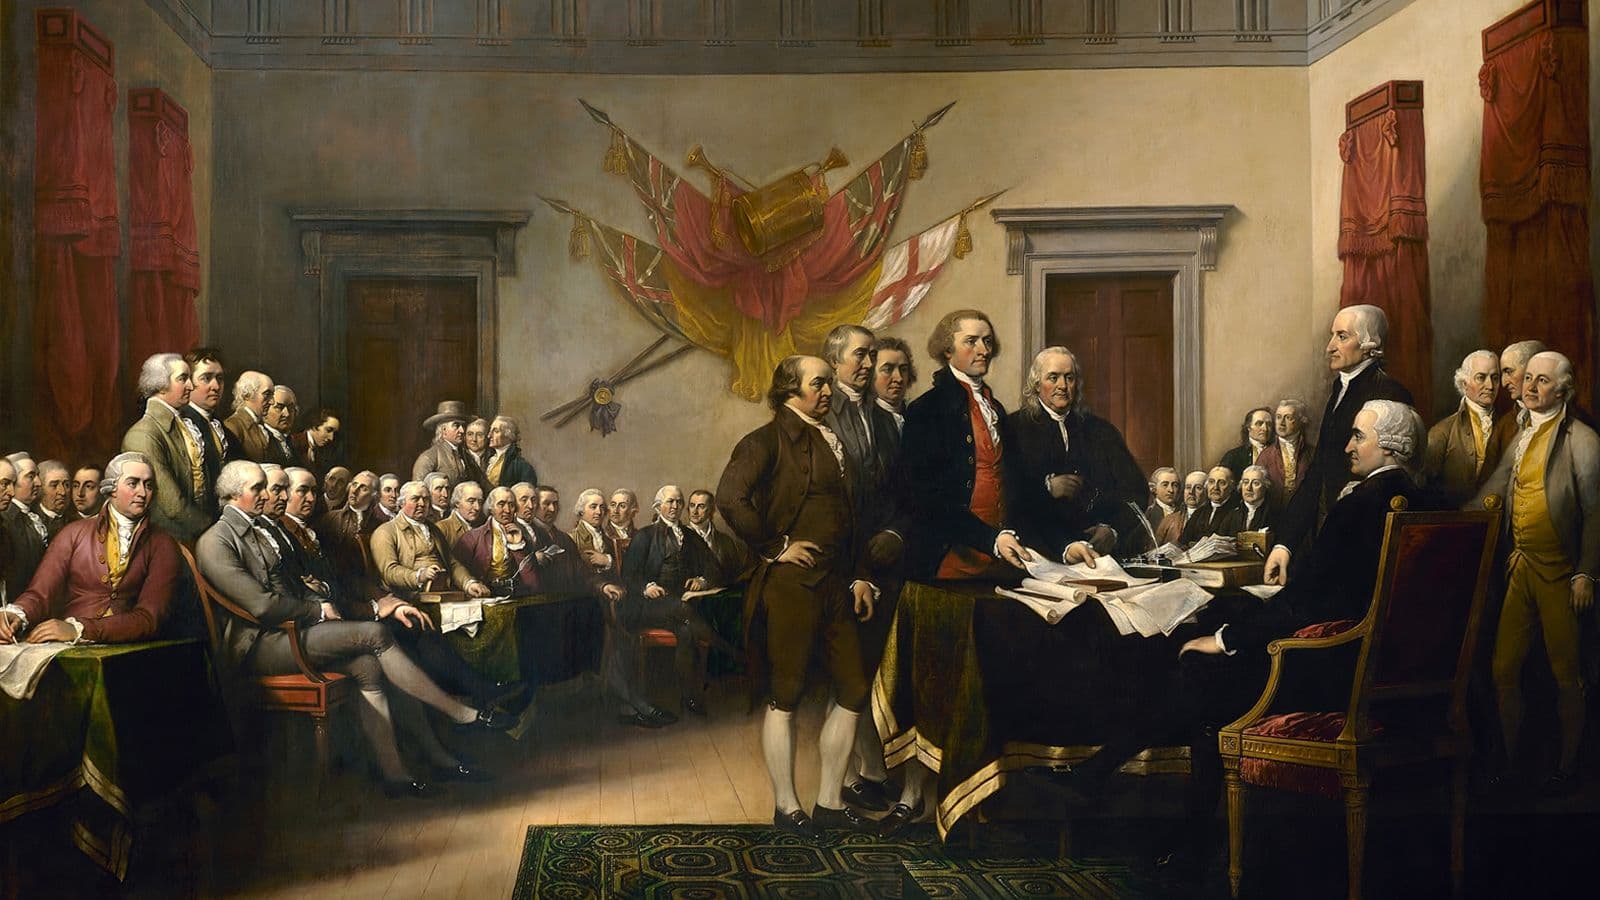 John Trumball’s painting Declaration of Independence